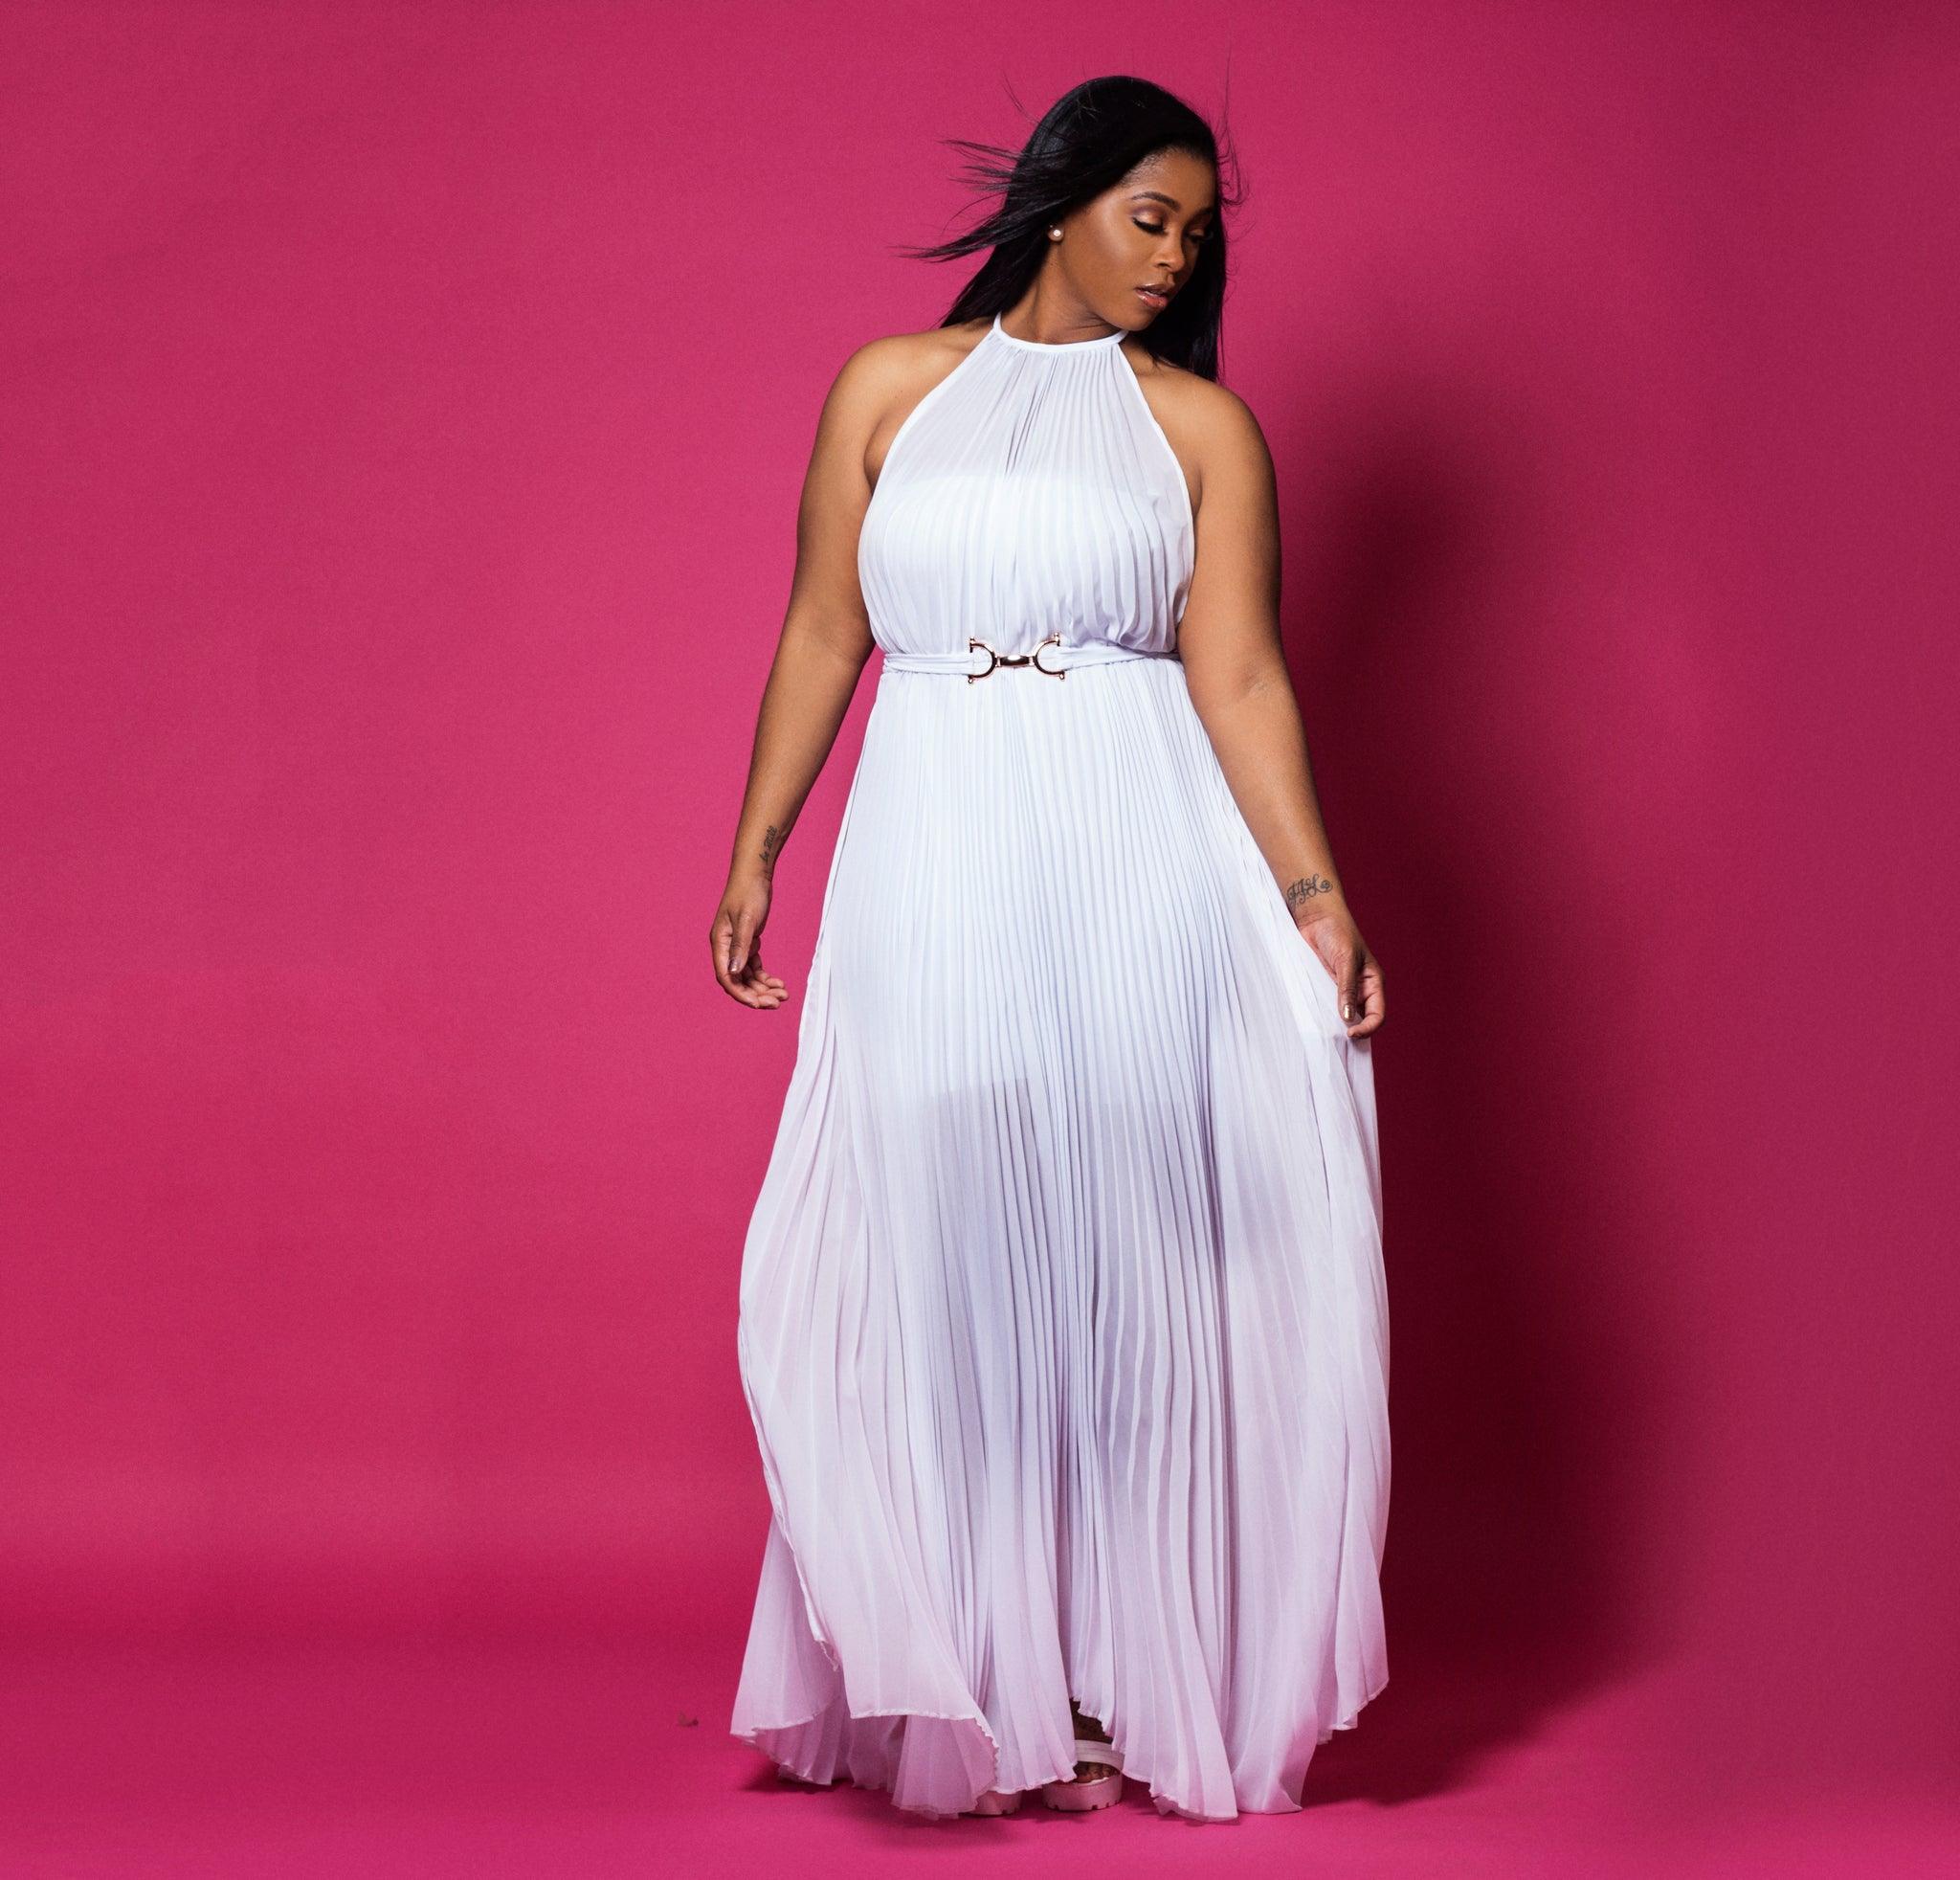 Plus Size White Pleated Chiffon Gown Romper with side splits Bridal Bridesmaid Dress Courtney Noelle Belle